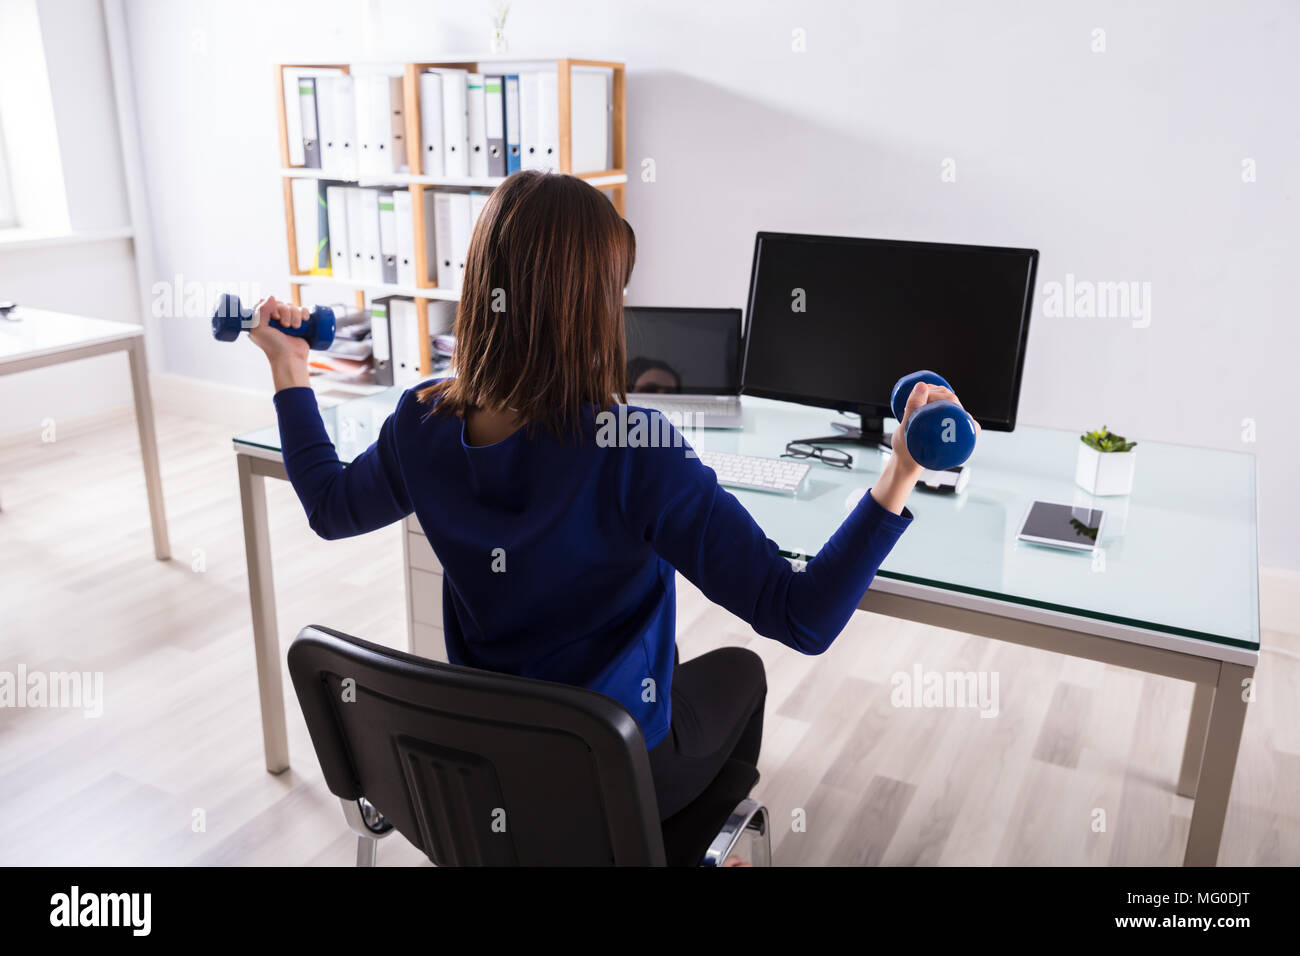 Young Businesswoman Sitting On Chair Doing Workout With Dumbbell Stock Photo